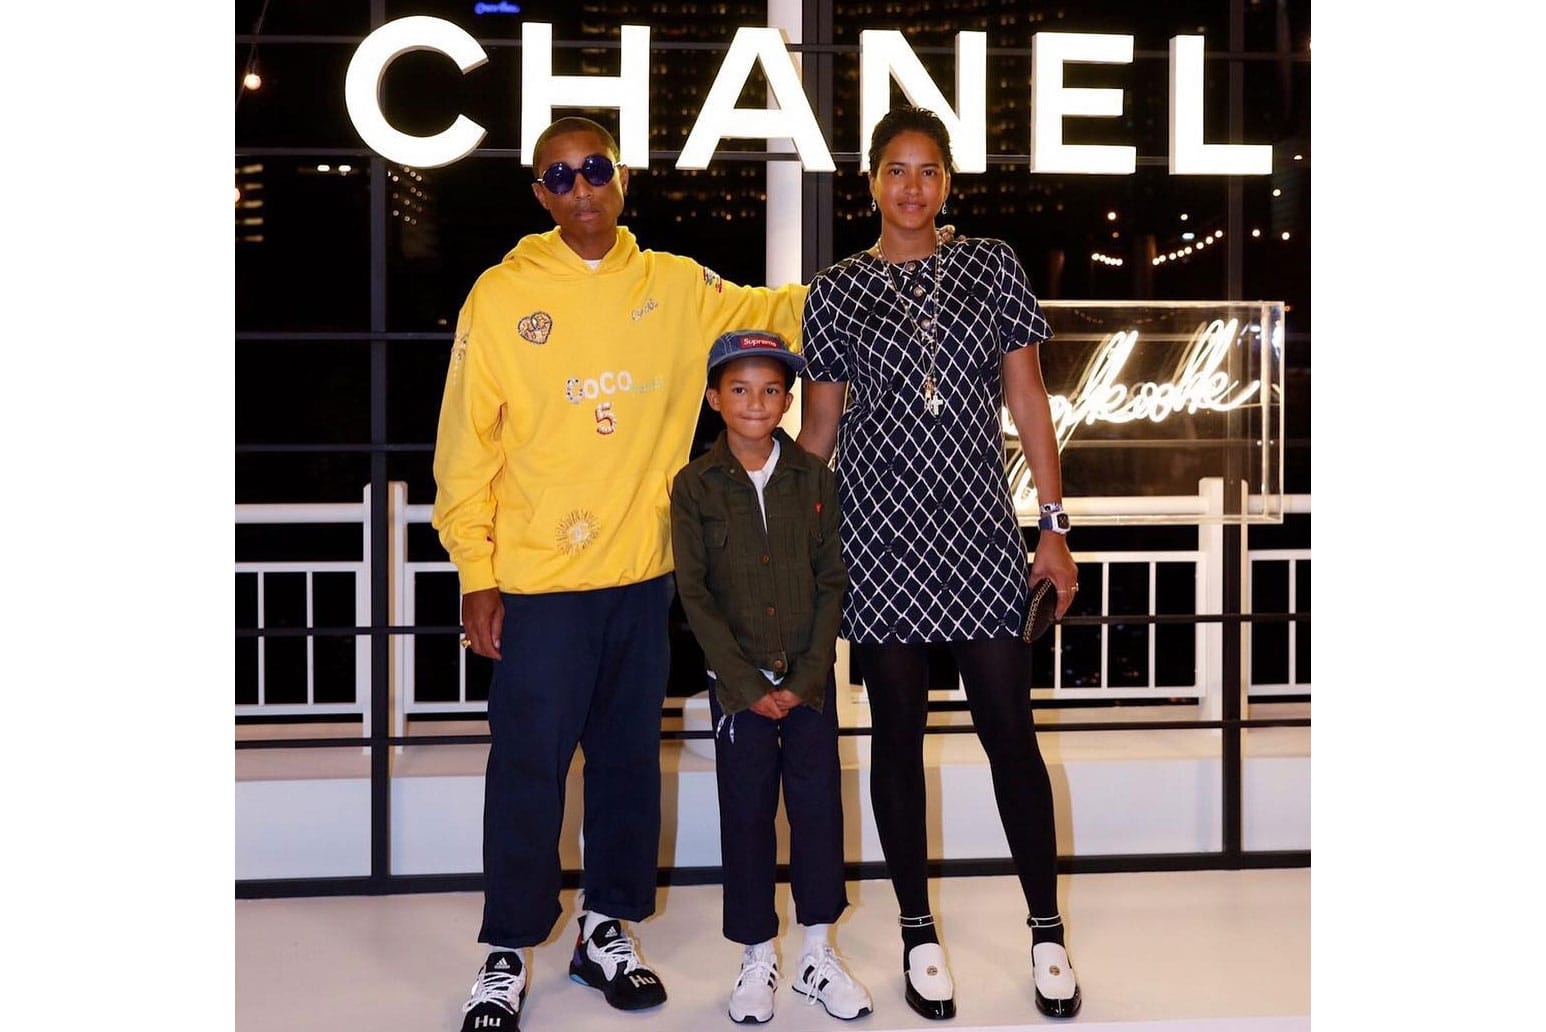 The ChanelPharrell Capsule Collection Is Coming To Dubai  GQ Middle East